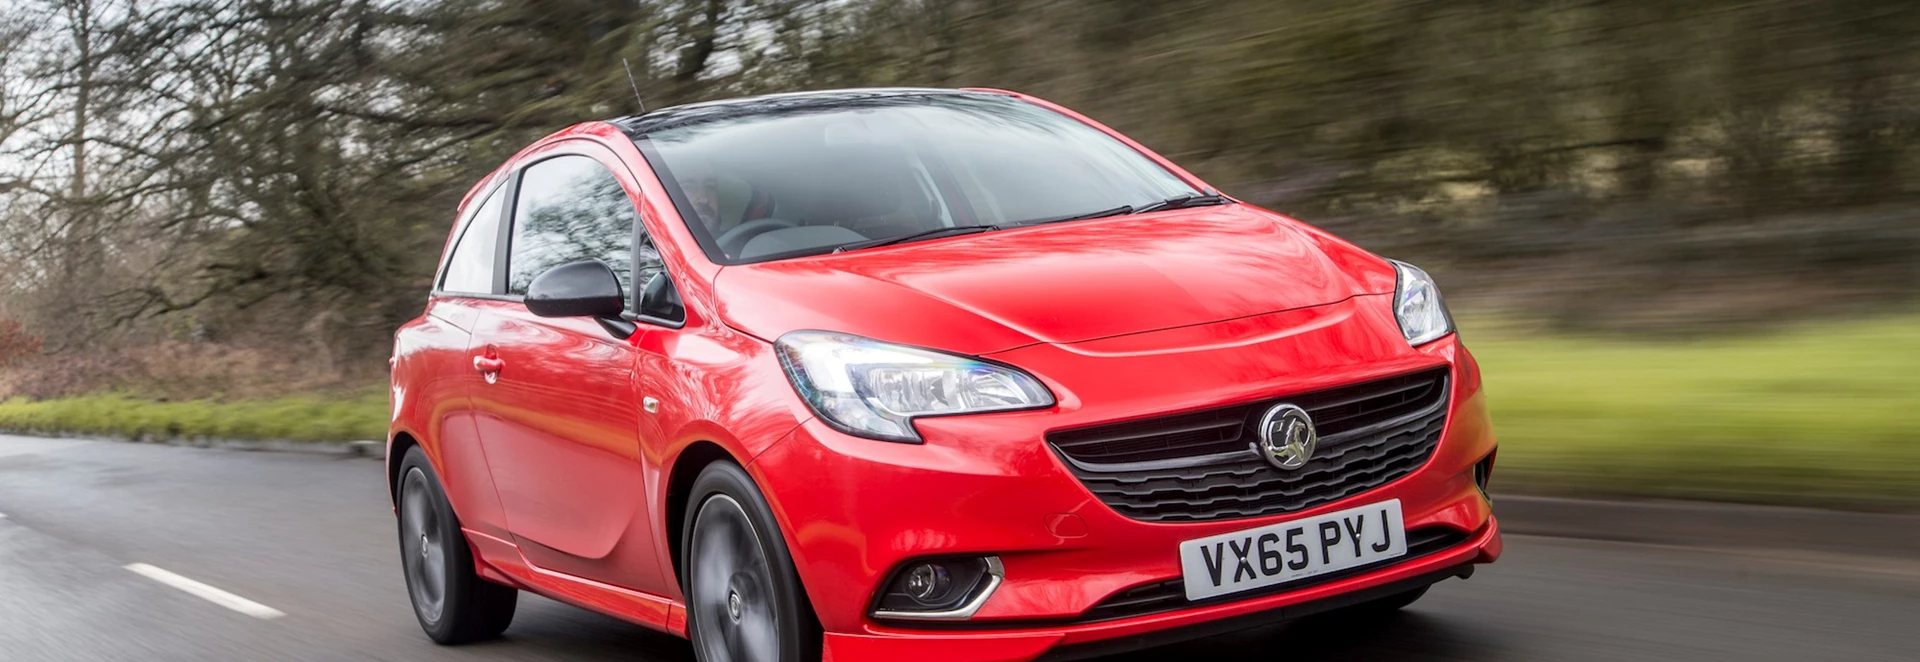 Vauxhall to introduce all-electric Corsa 